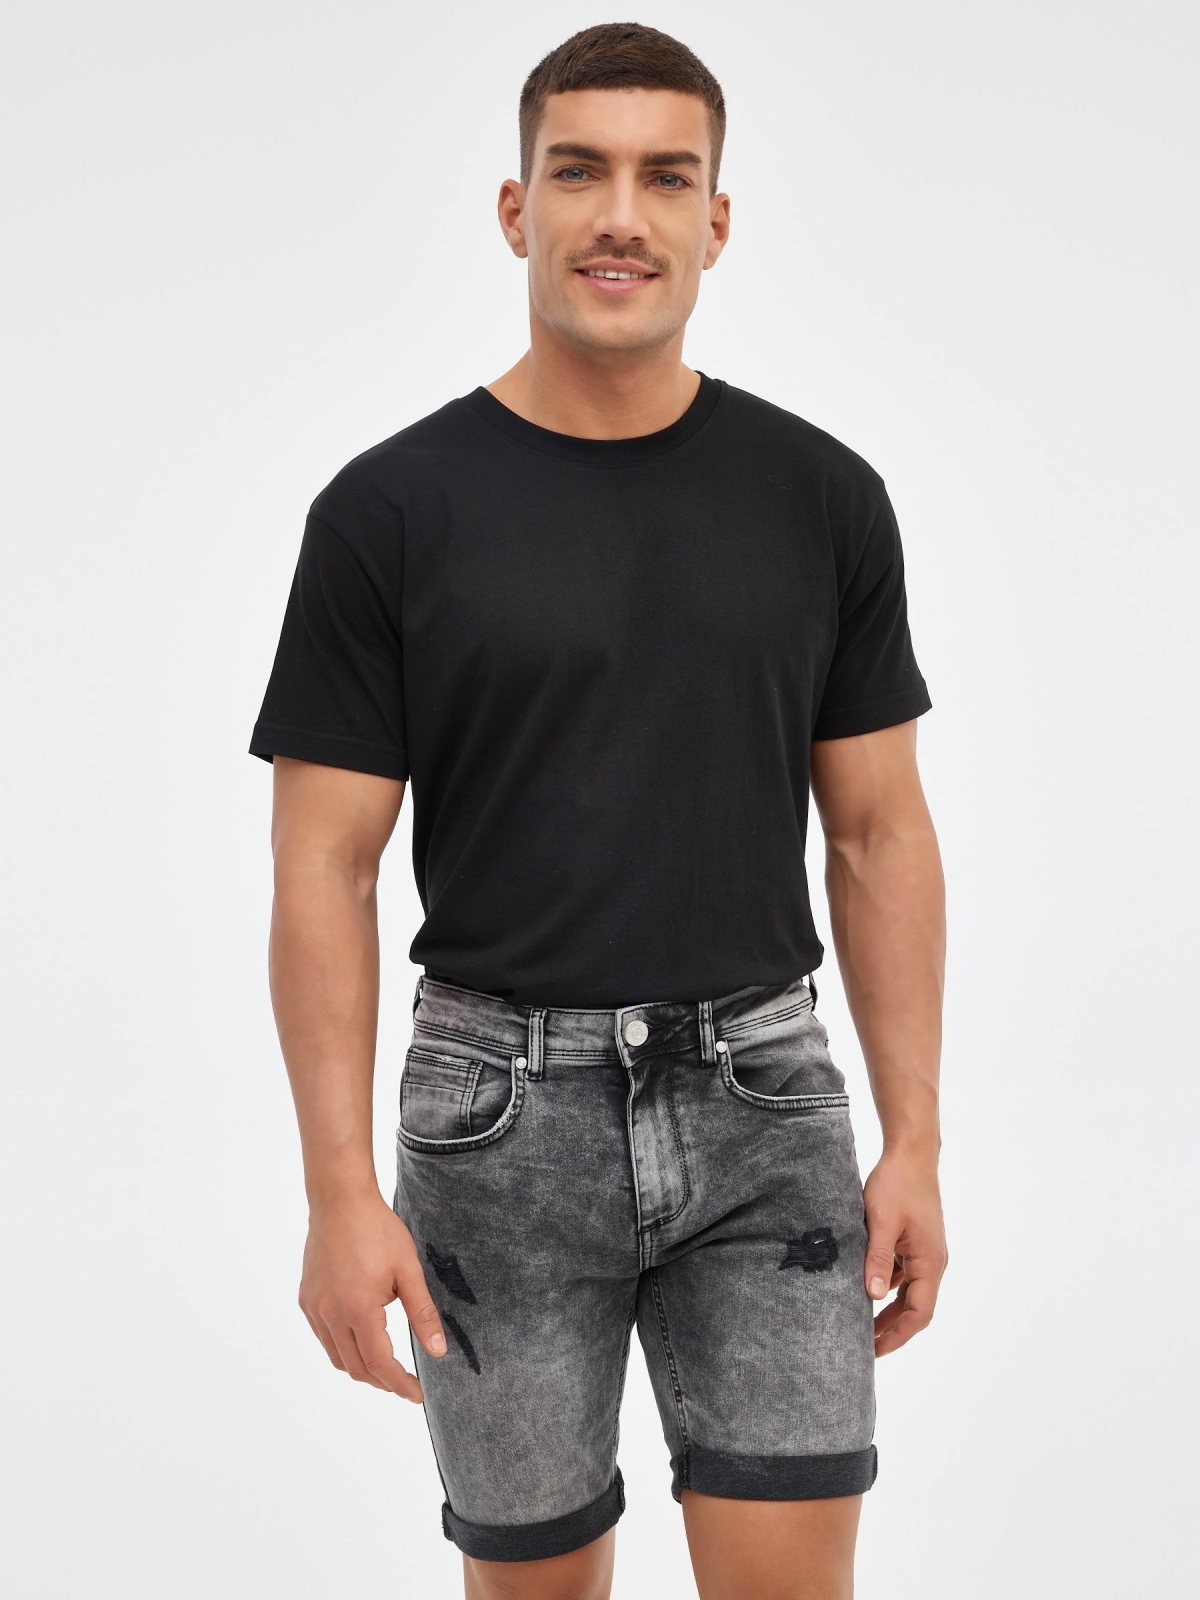 Slim bermuda short ripped wash effect black middle front view